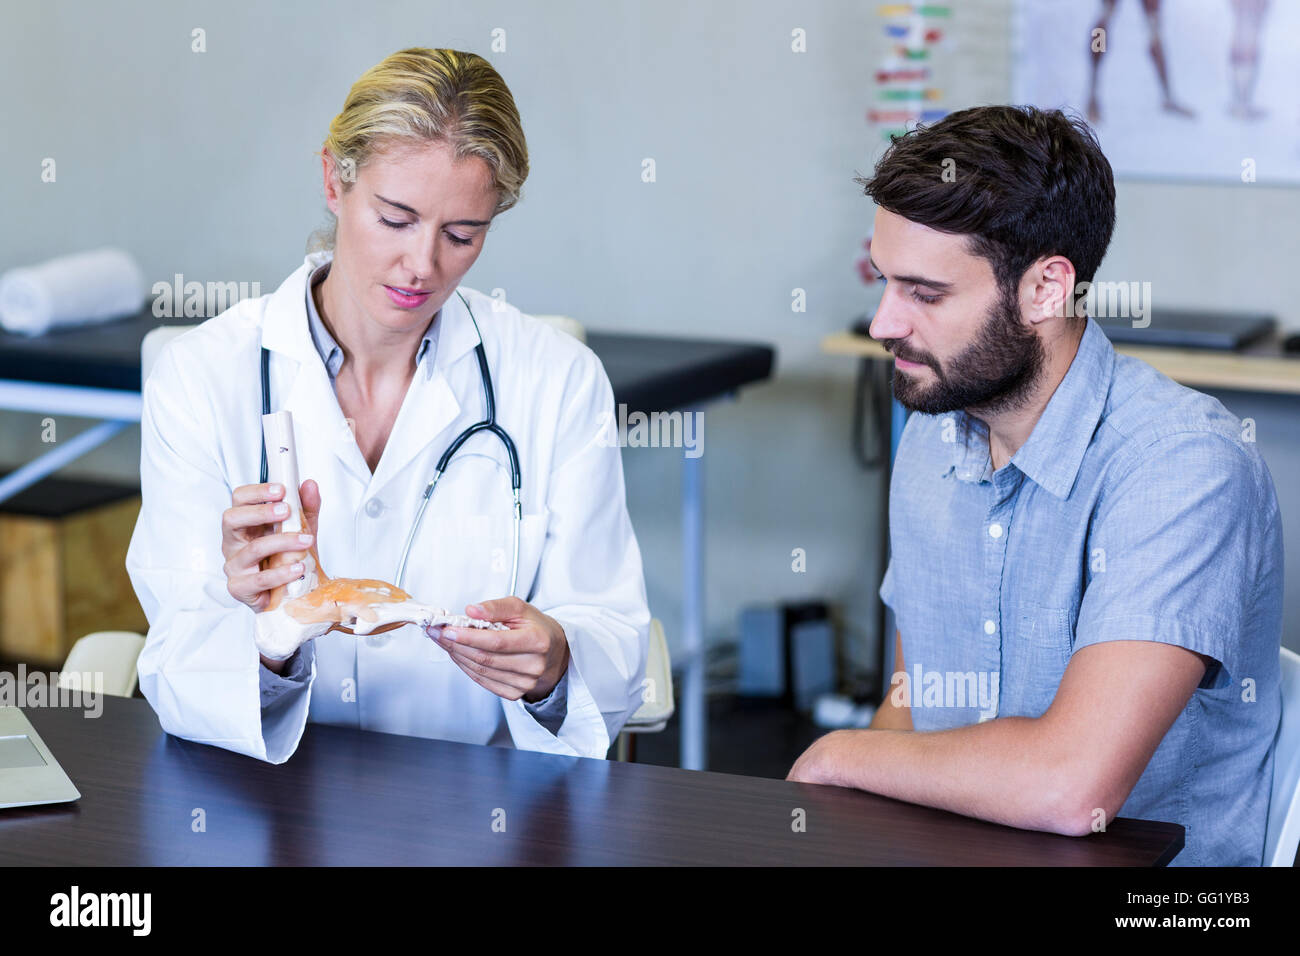 Physiotherapist showing a skeleton feet model to patient Stock Photo